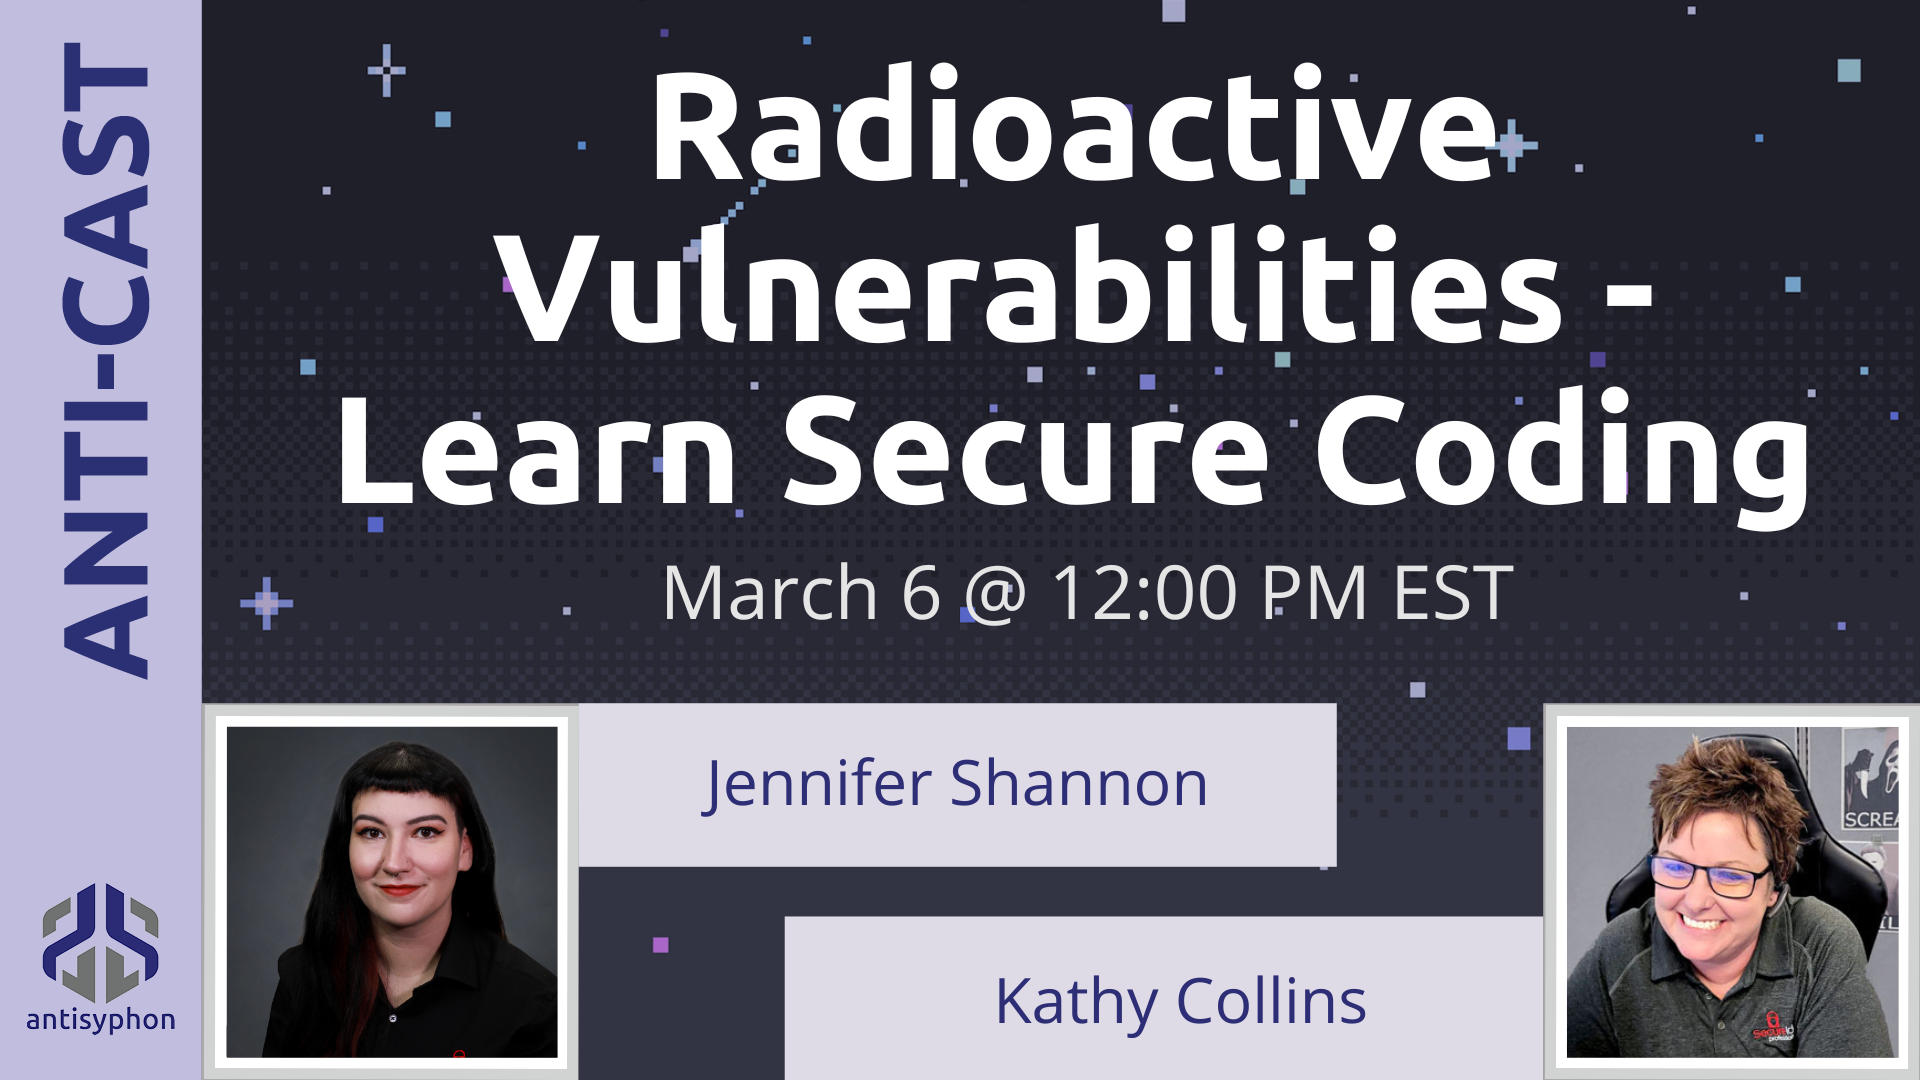 Anti-Cast | Radioactive Vulnerabilities-Learn Secure Coding w/ Jennifer Shannon and Kathy Collins